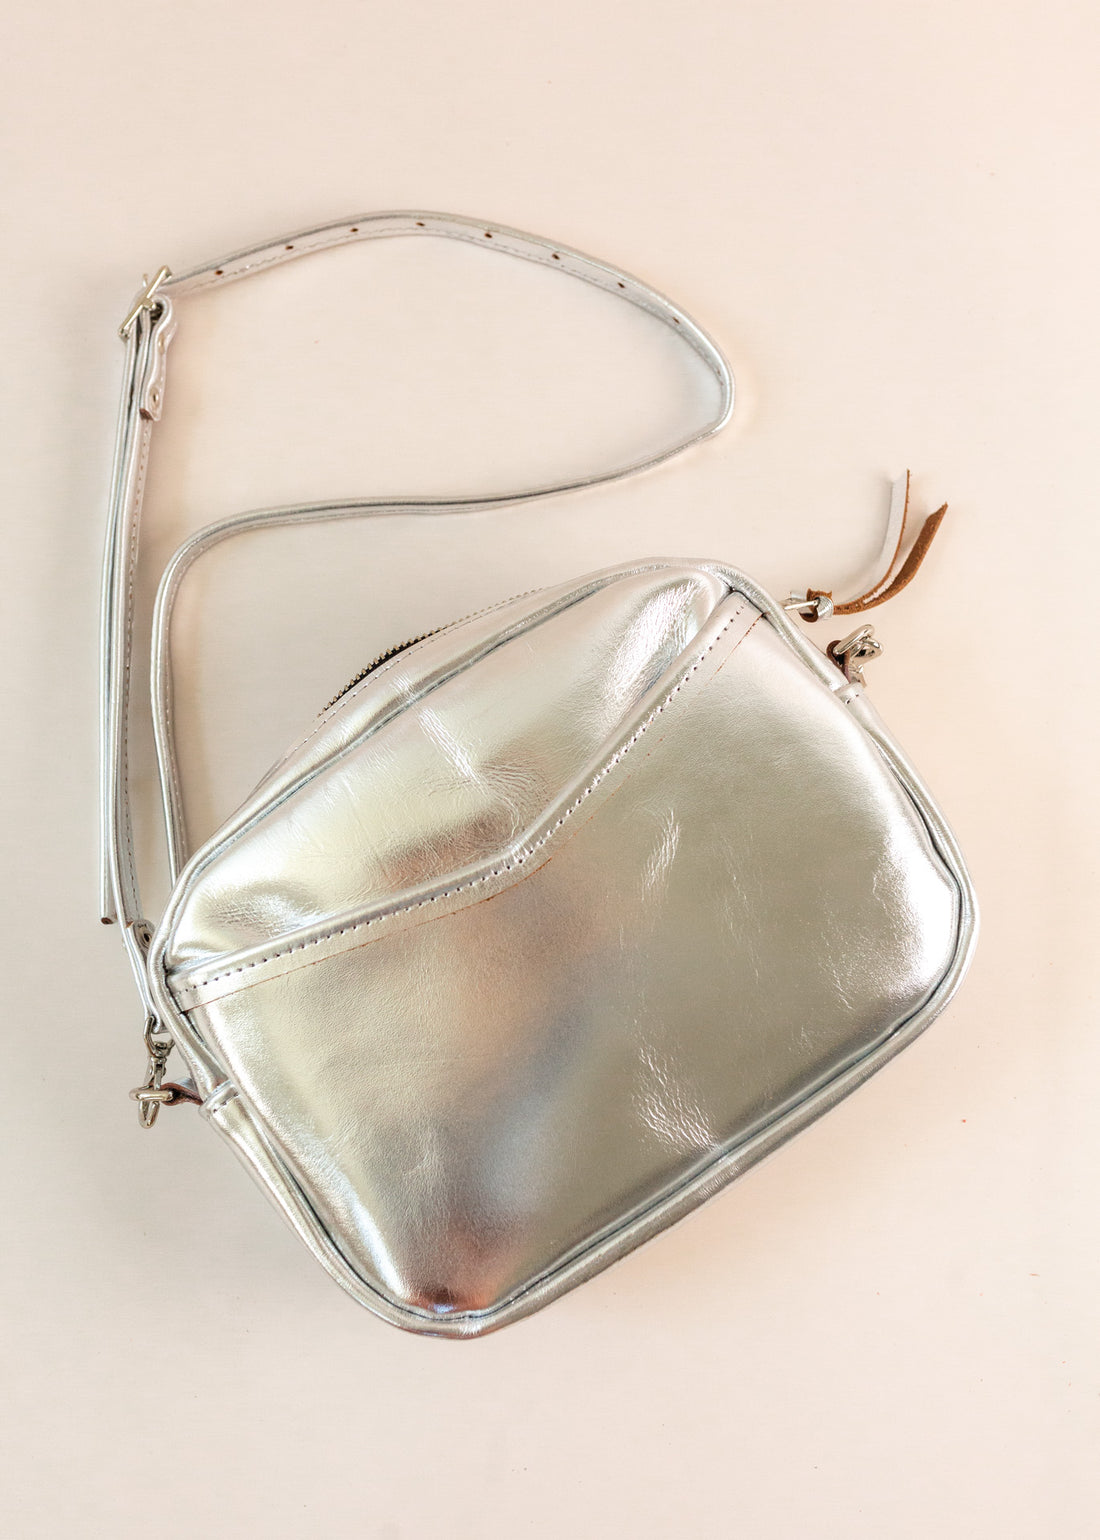 Flatlay of cubist handbag in silver, with a v-shaped front pocket and a long thin shoulder strap